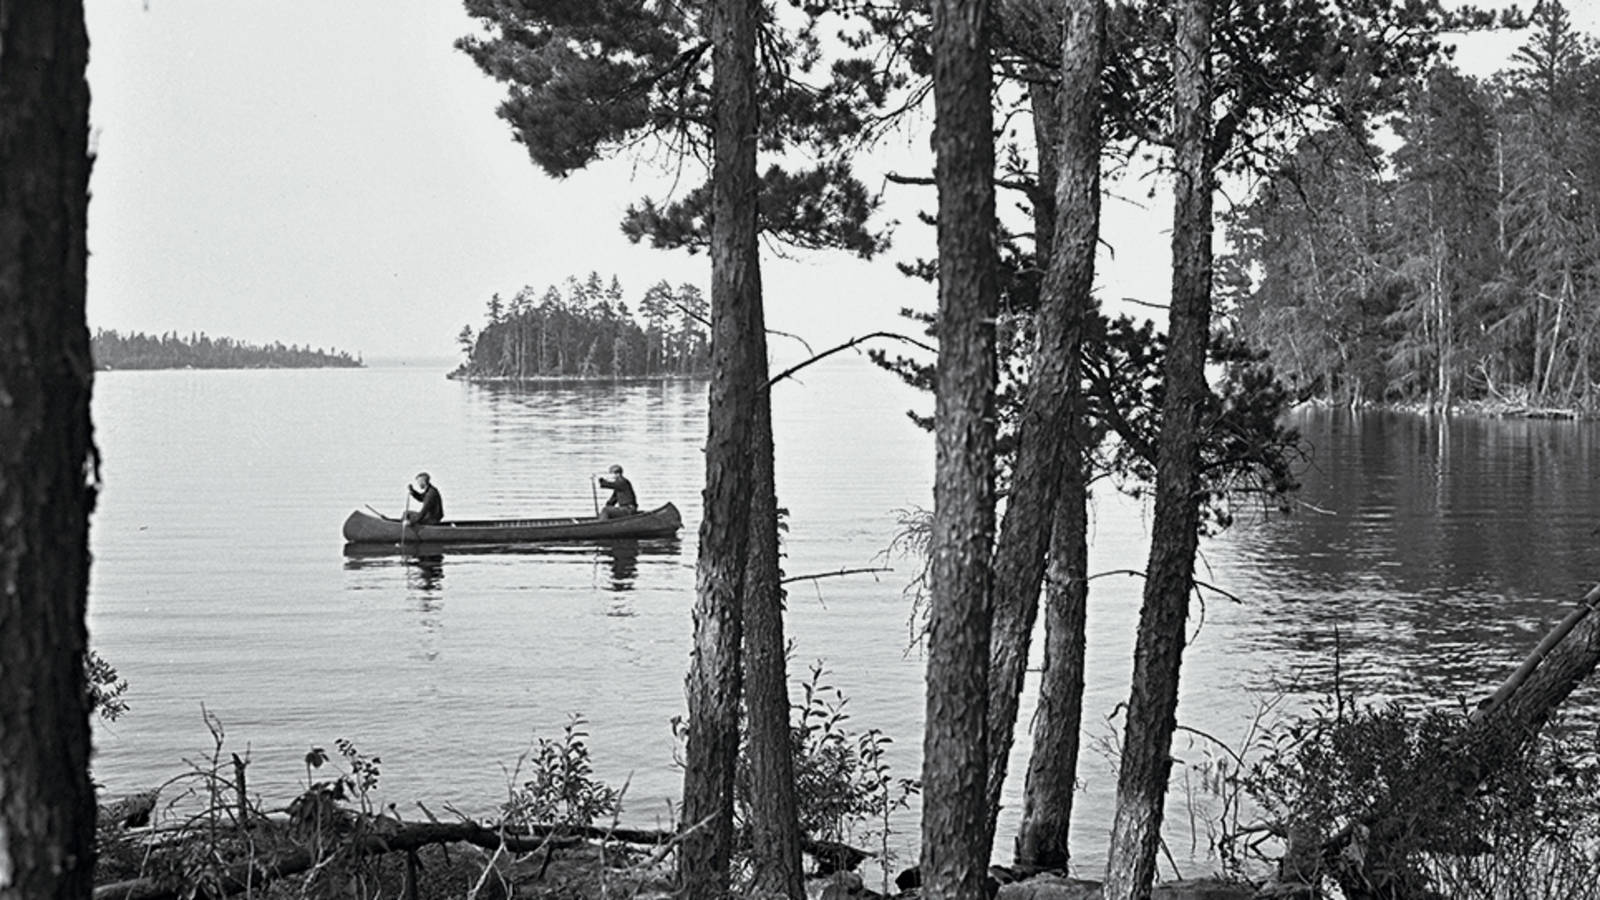 Historic black and white photograph of two men in a canoe on a lake with rocky outcrops and islands covered in pines around them 